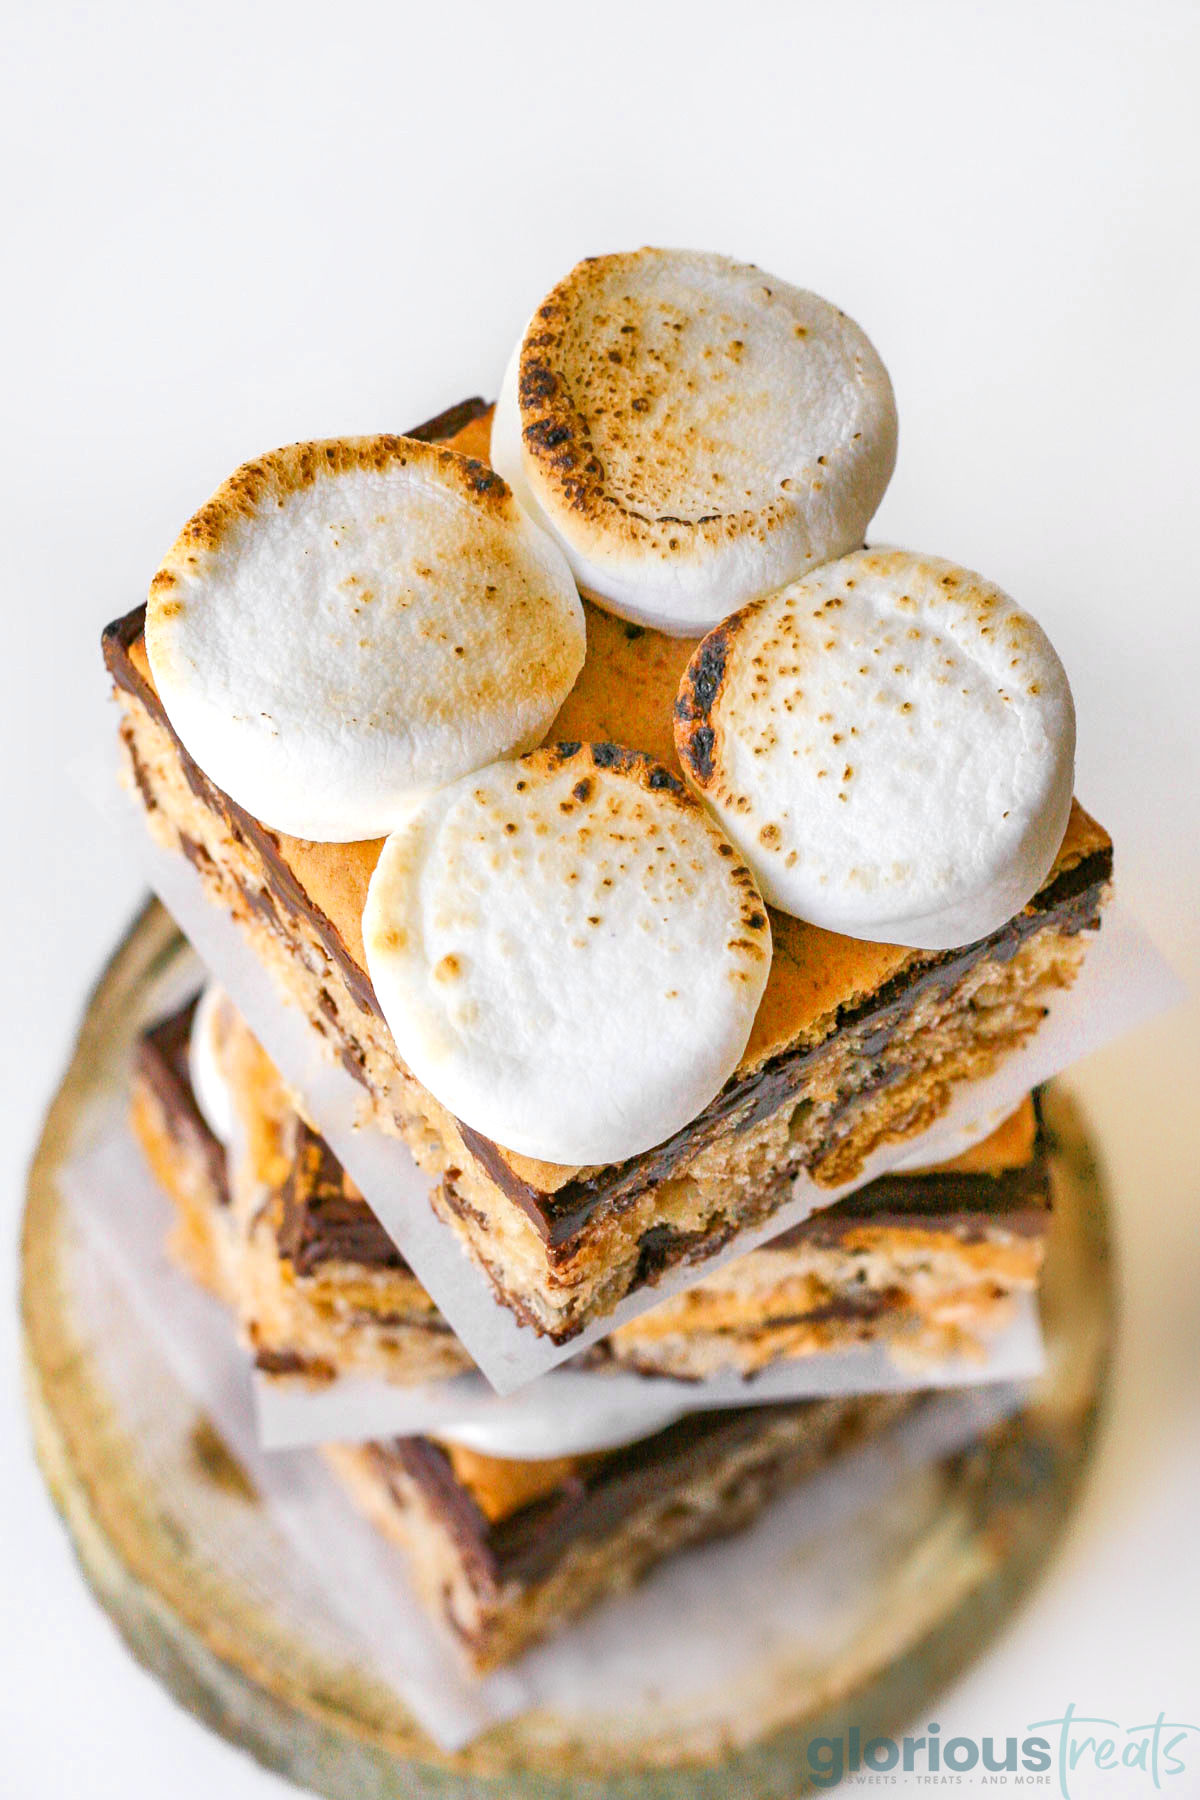 Top down view of smores rice krispie treats stacked on a small log. You can see 4 toasted marshmallows on top of the treat.